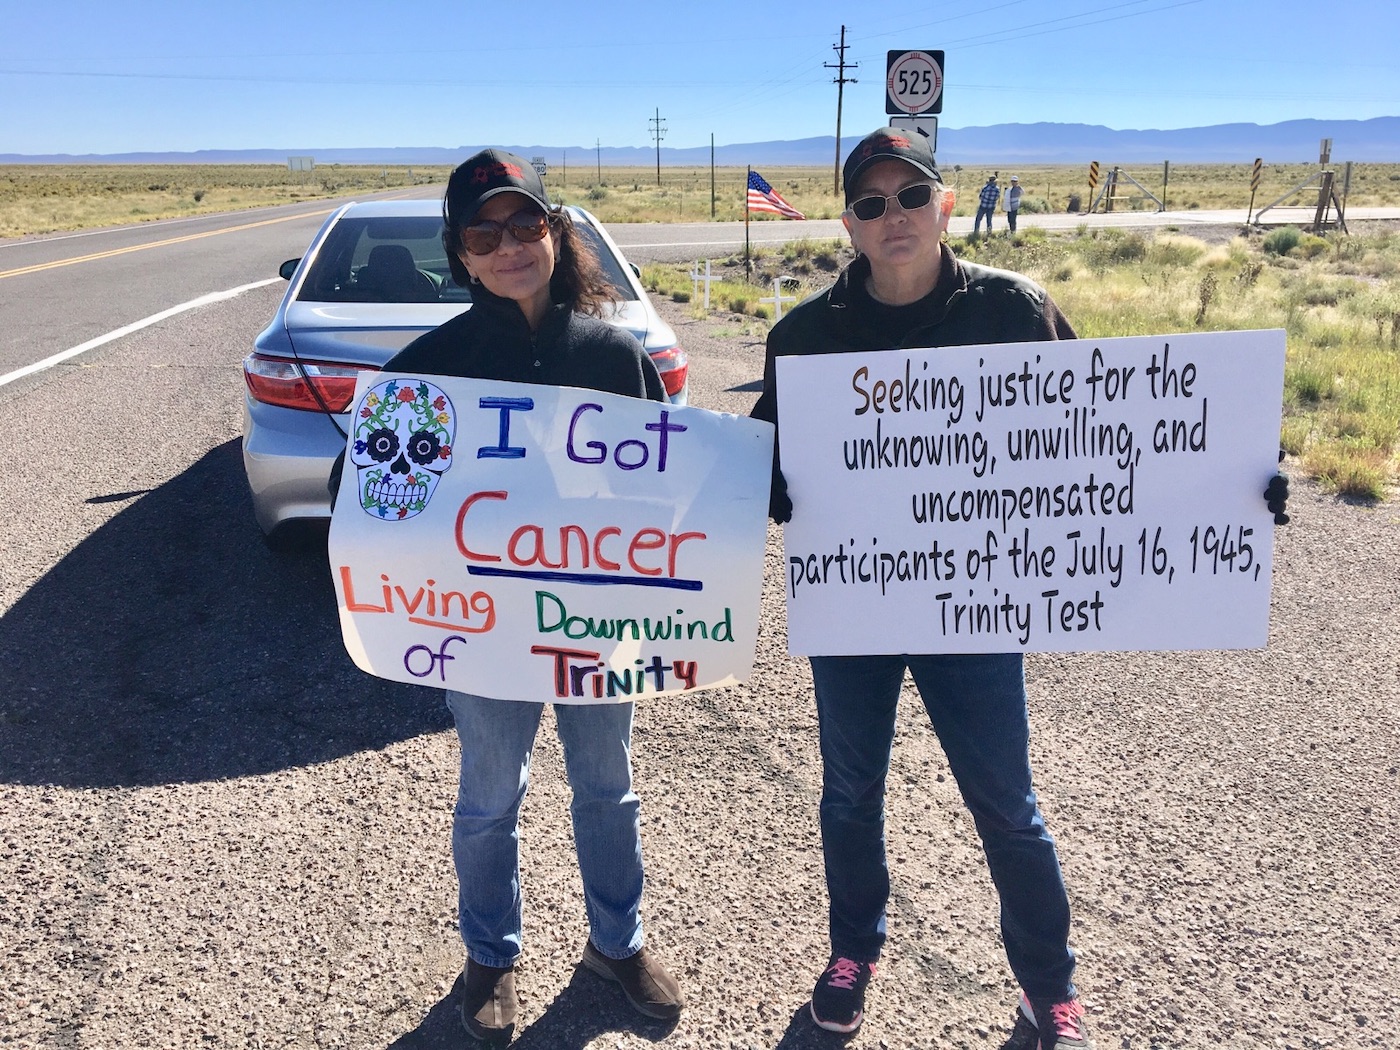 Two people holding signs. One says: "I got cancer living downwind of Trinity" and the other says: "Seeking justice for the unkniwing, unwilling, and uncompensated participants of the July 16, 1945 Trinity Test"